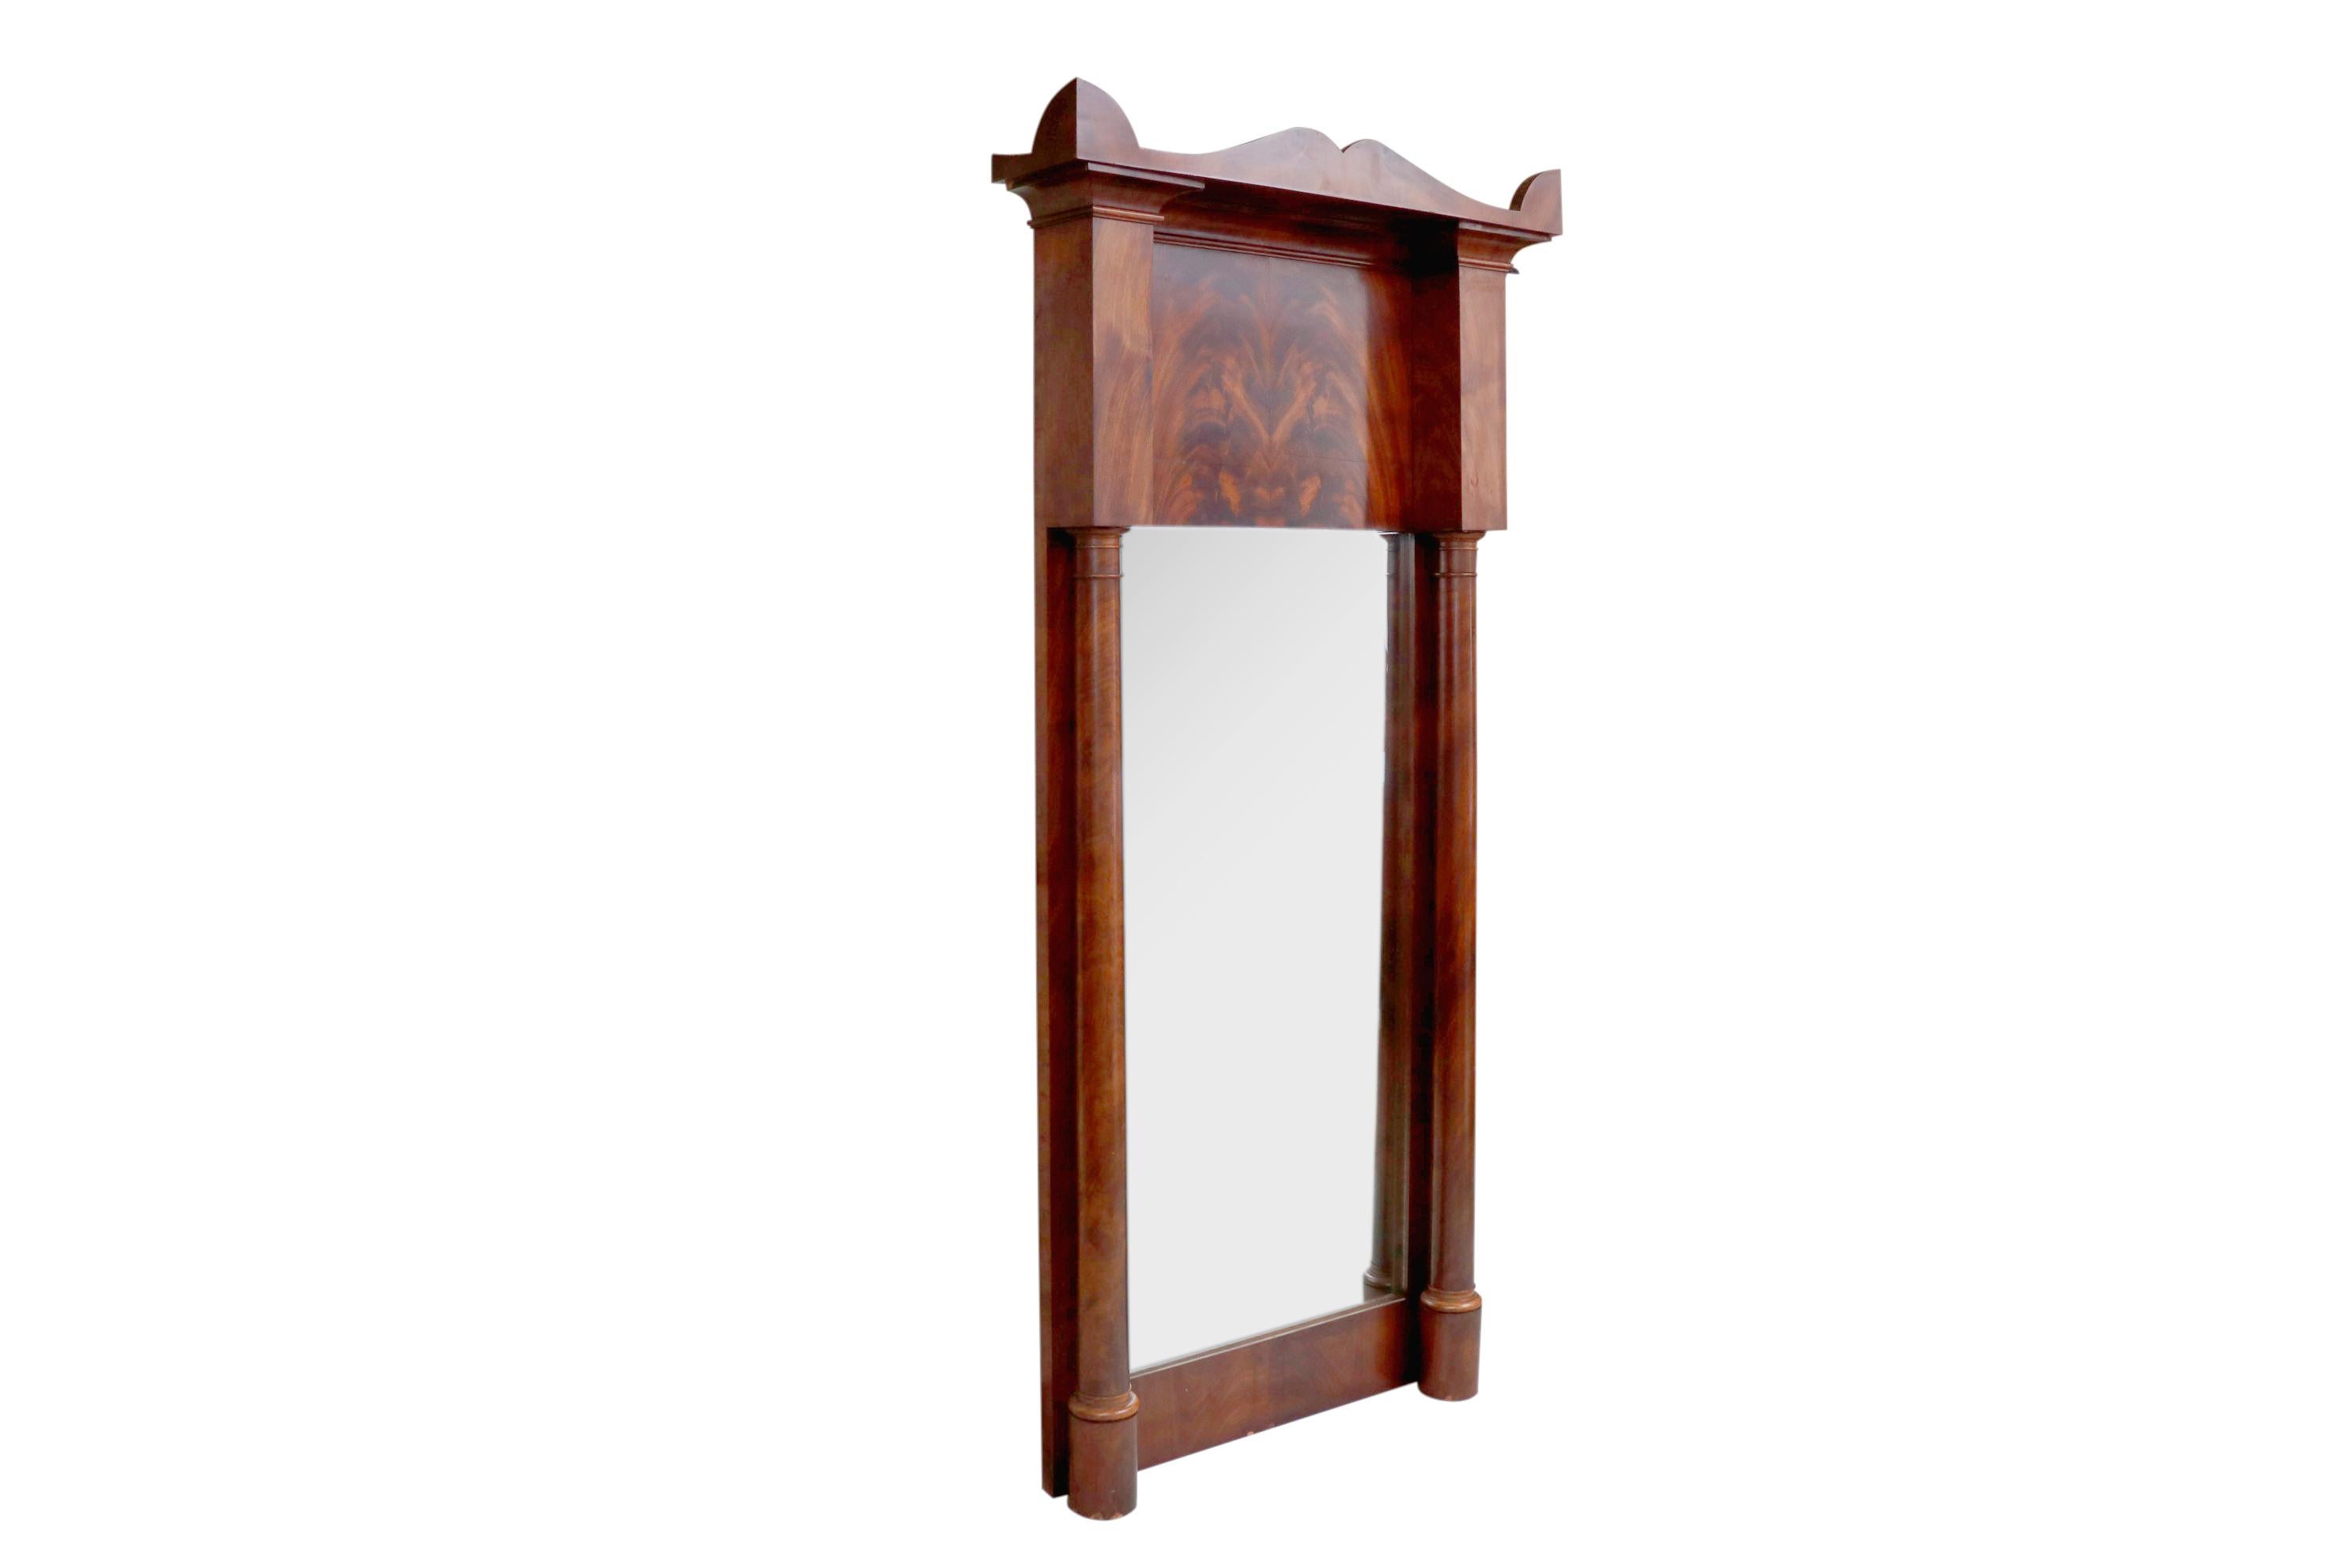 Large architectural Biedermeier mirror measures 74 inches high and 35 inches wide beautiful crotch mahogany veneer.